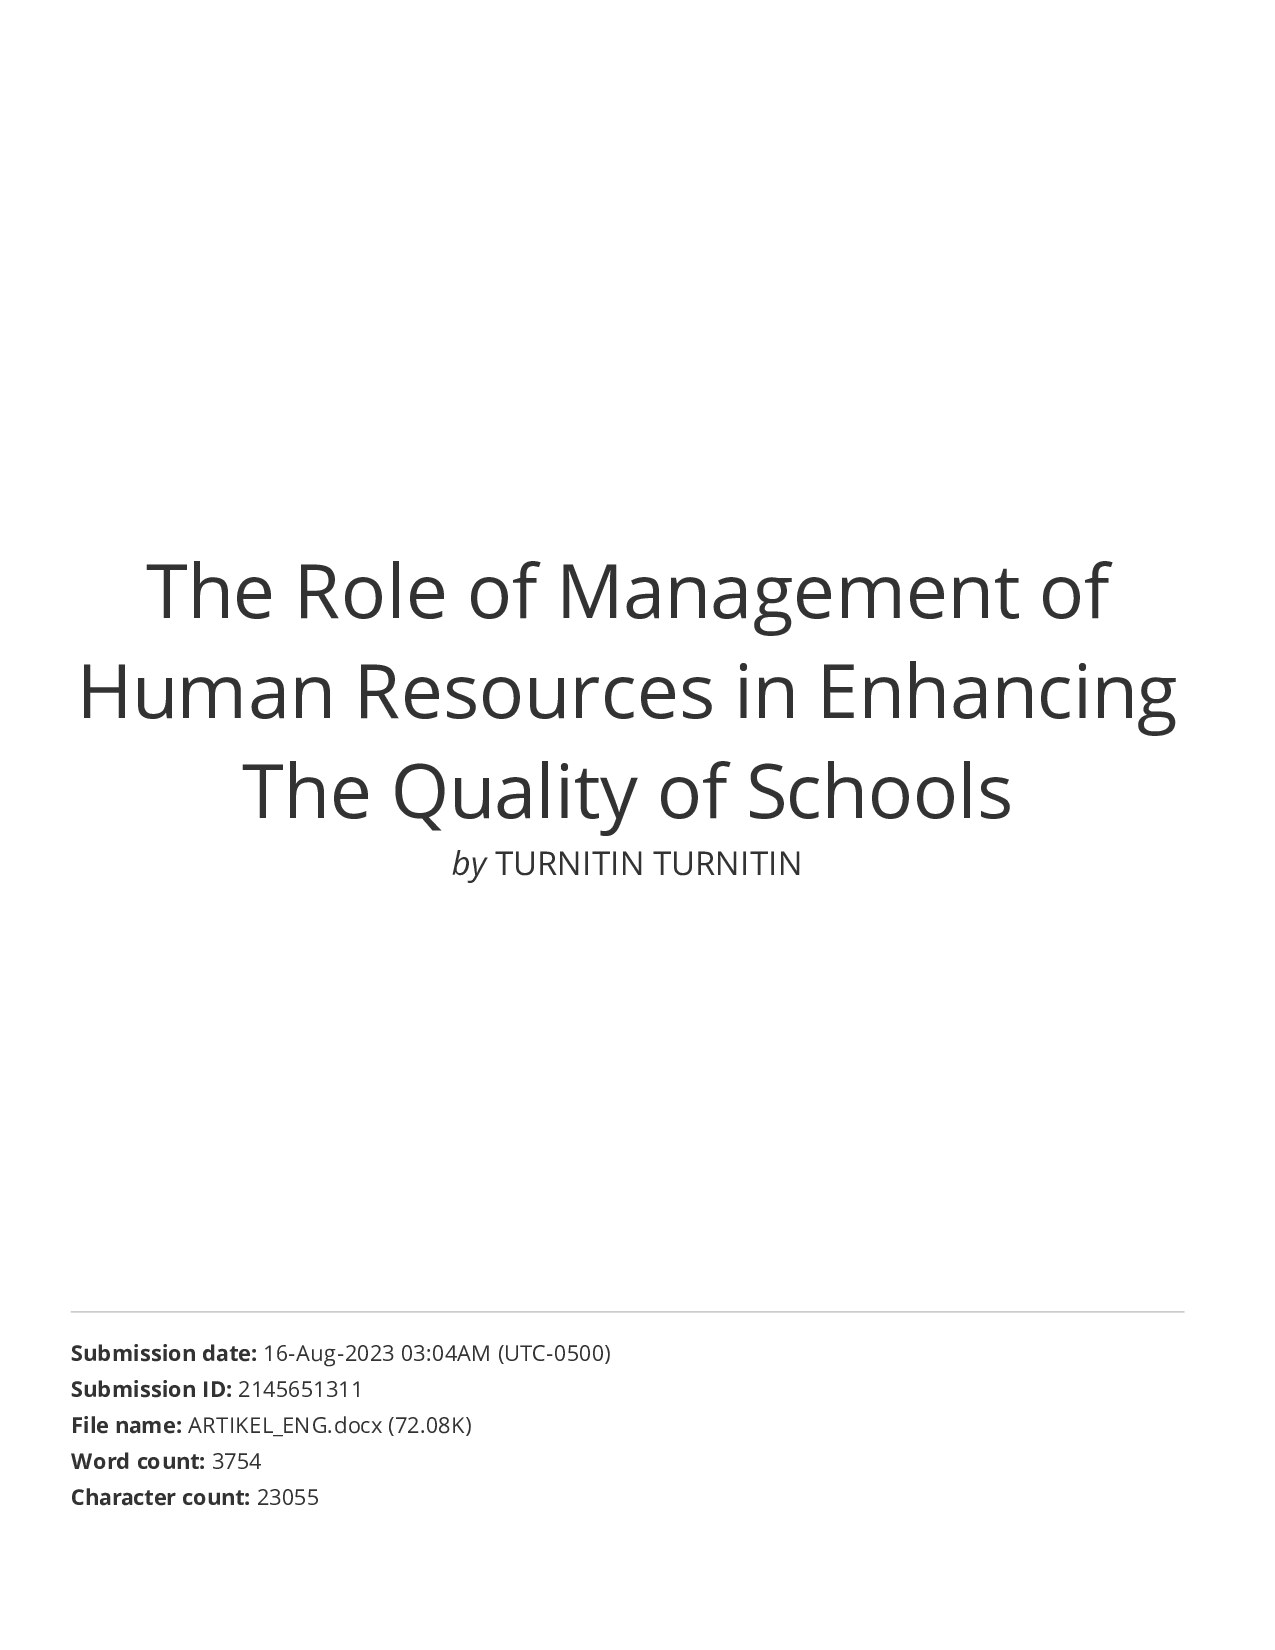 The Role of Management of Human Resources in Enhancing The Quality - HASIL TURNITIN 25_